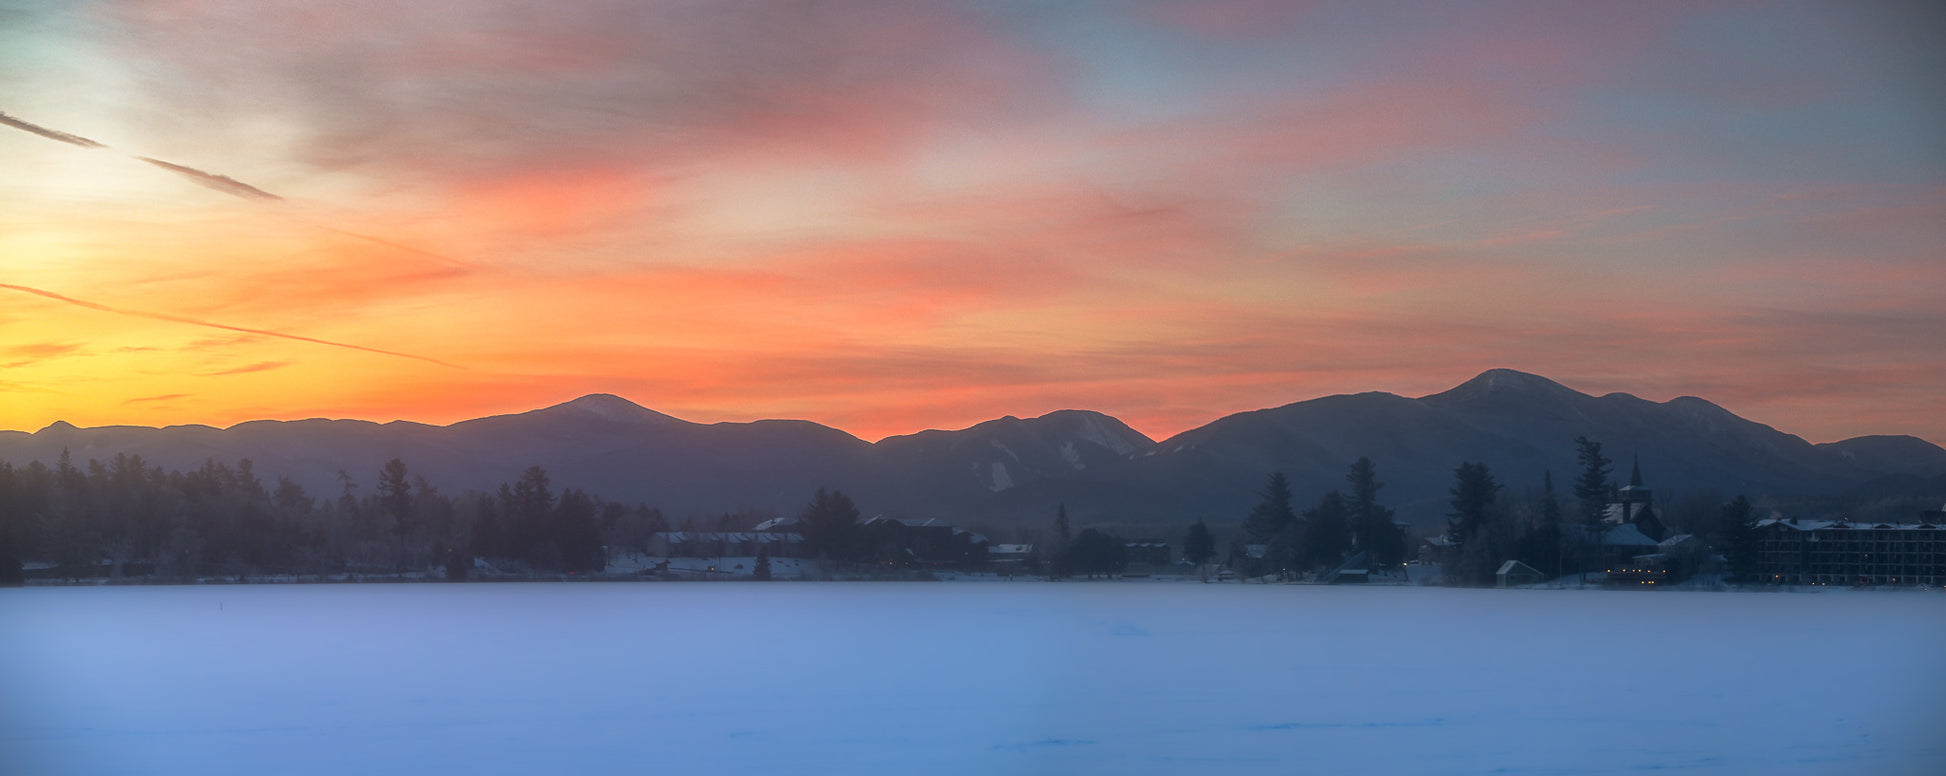 Winter's First Light on Mirror Lake in Lake Placid, New York